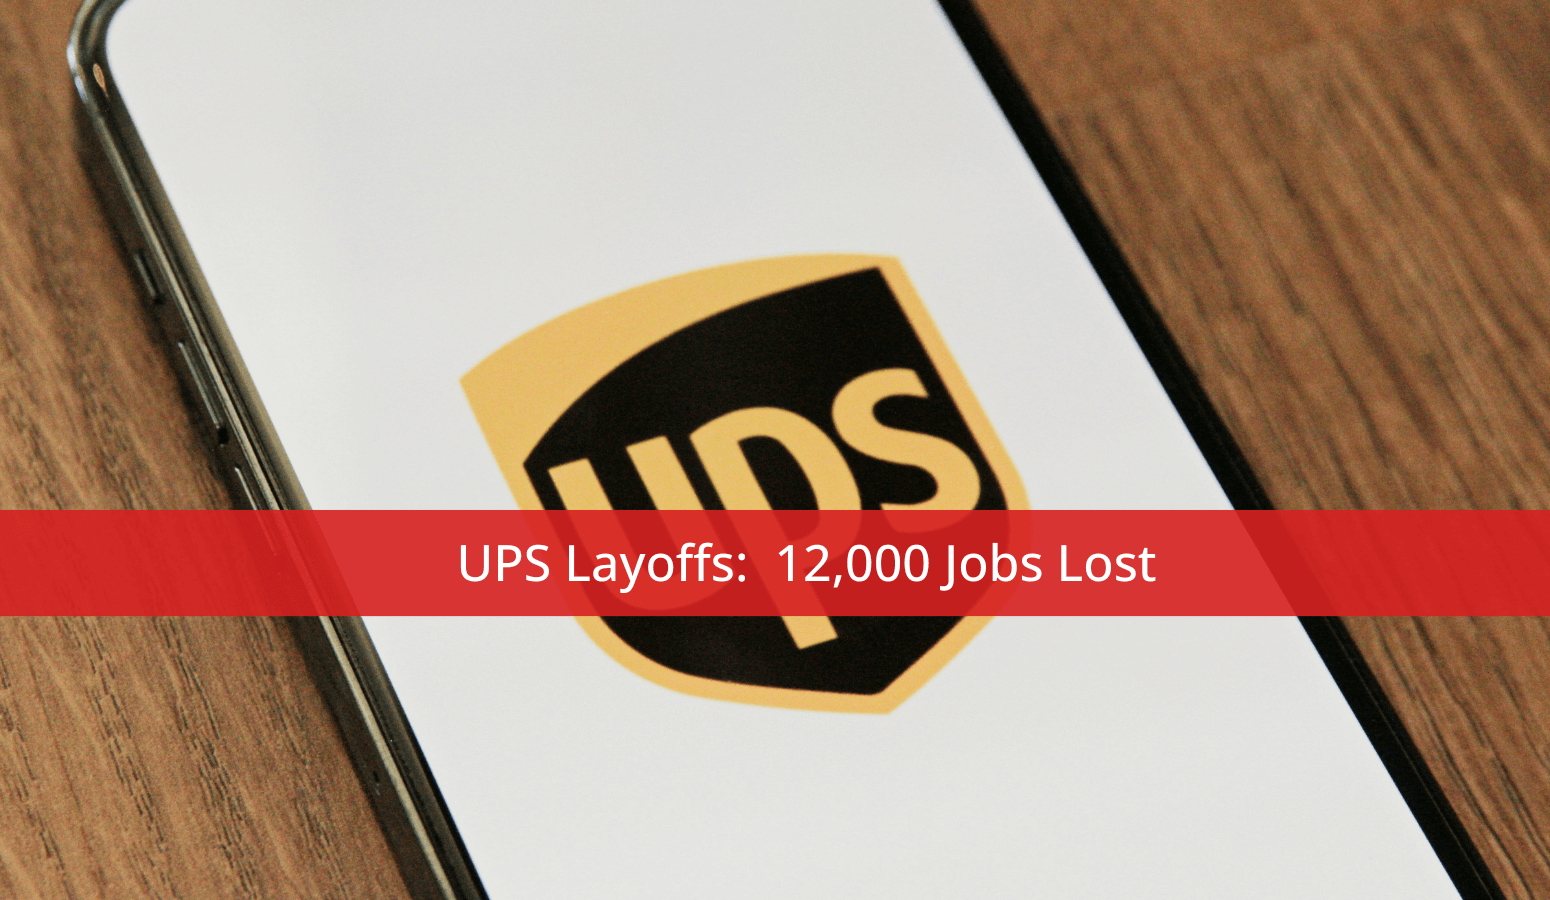 Featured image for “UPS Layoffs: 12,000 Jobs Lost”